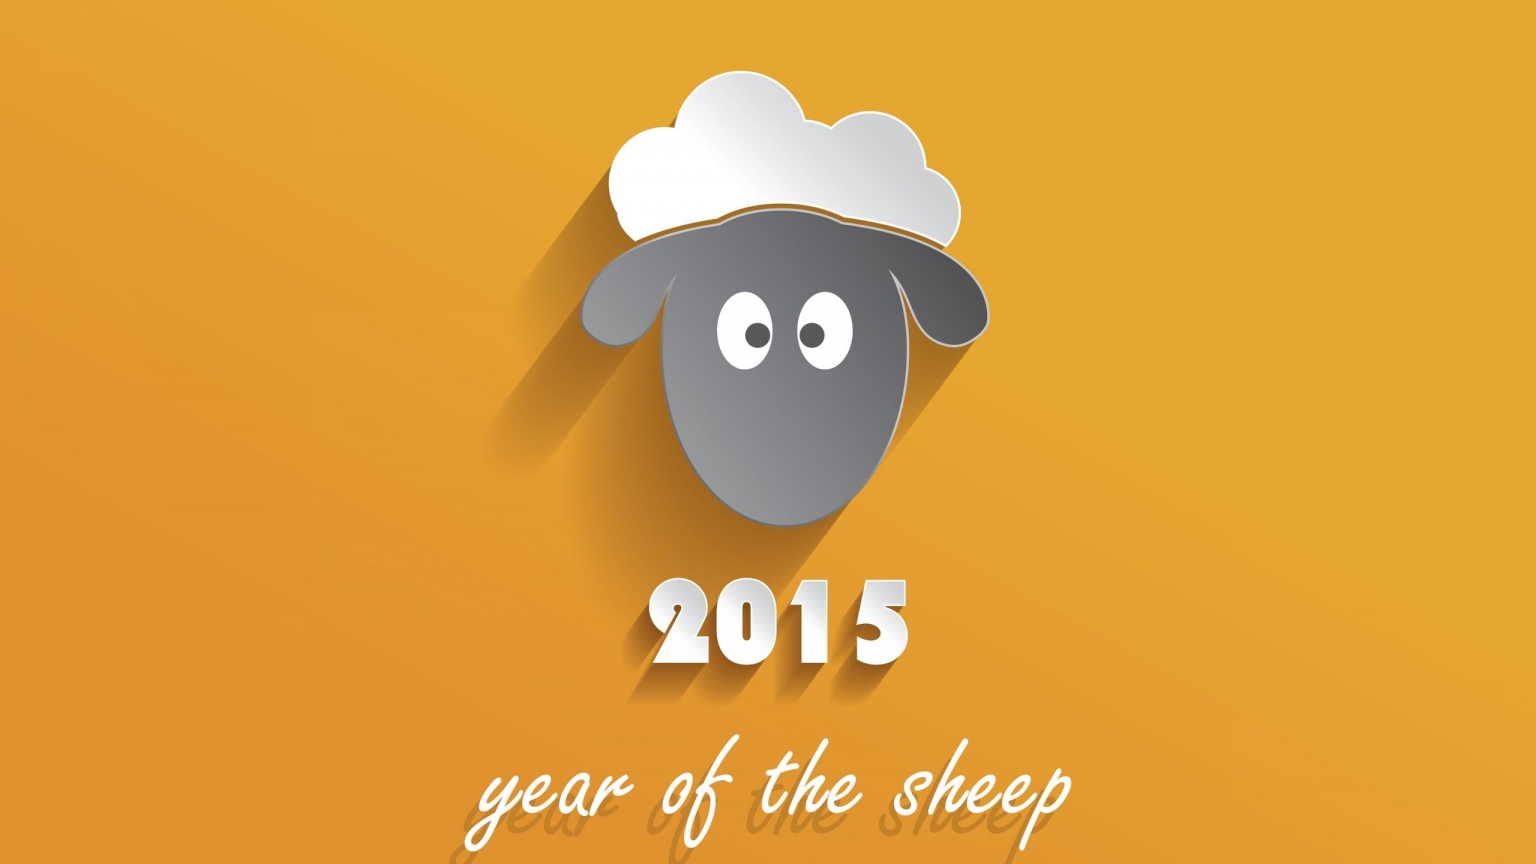 2015 Year of the Sheep for 1536 x 864 HDTV resolution